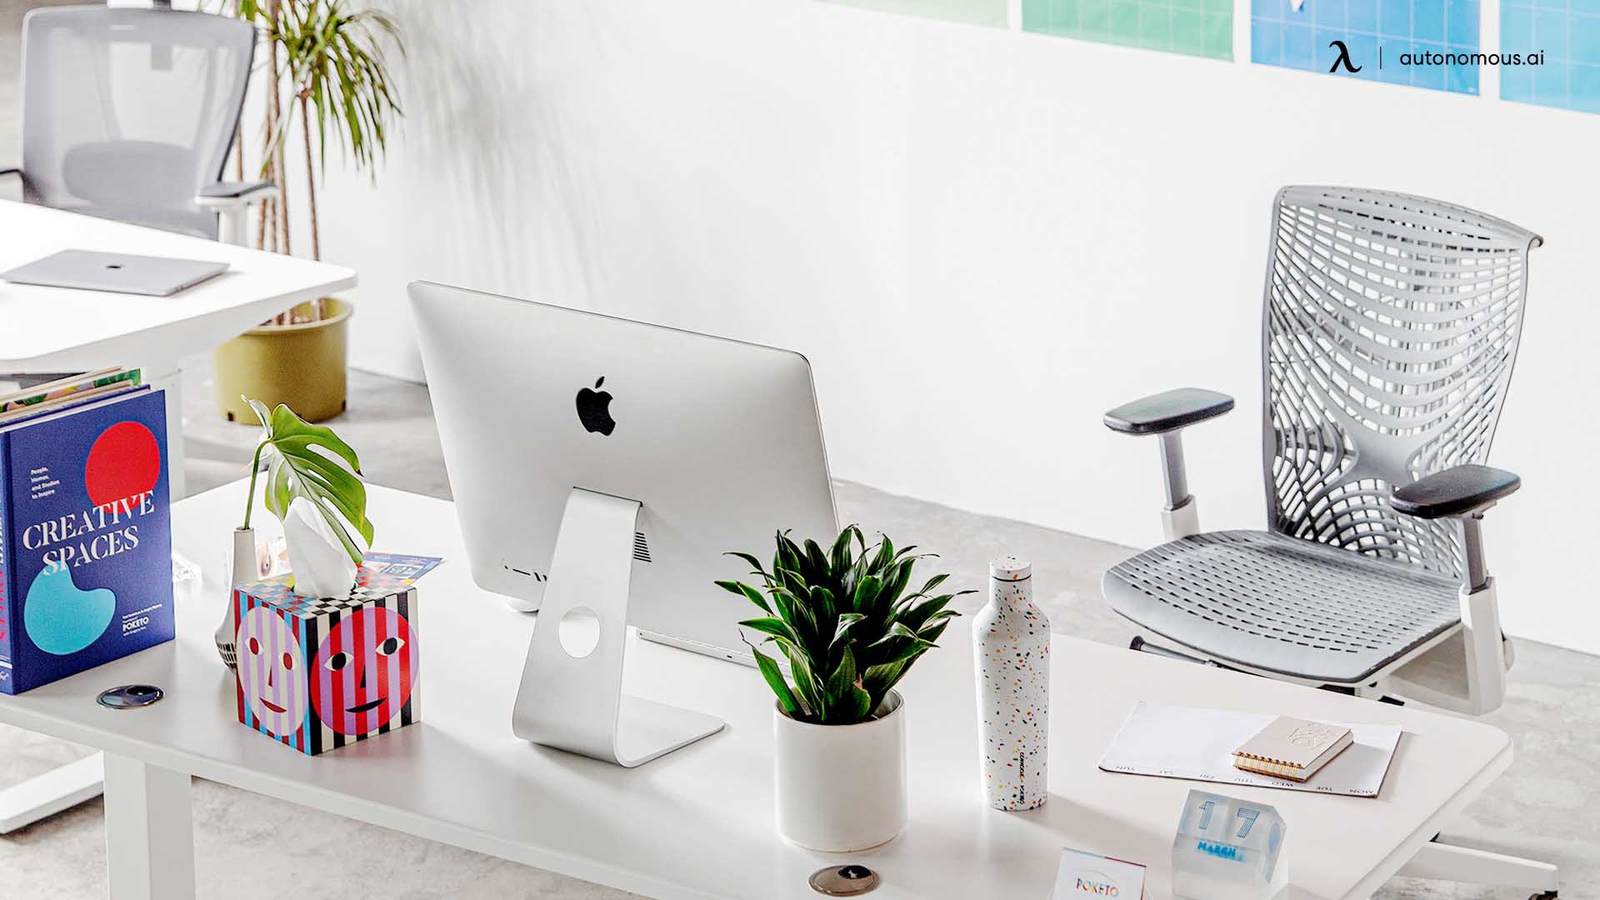 The 15 Best in Value Ergonomic Office Product Options for Workstation